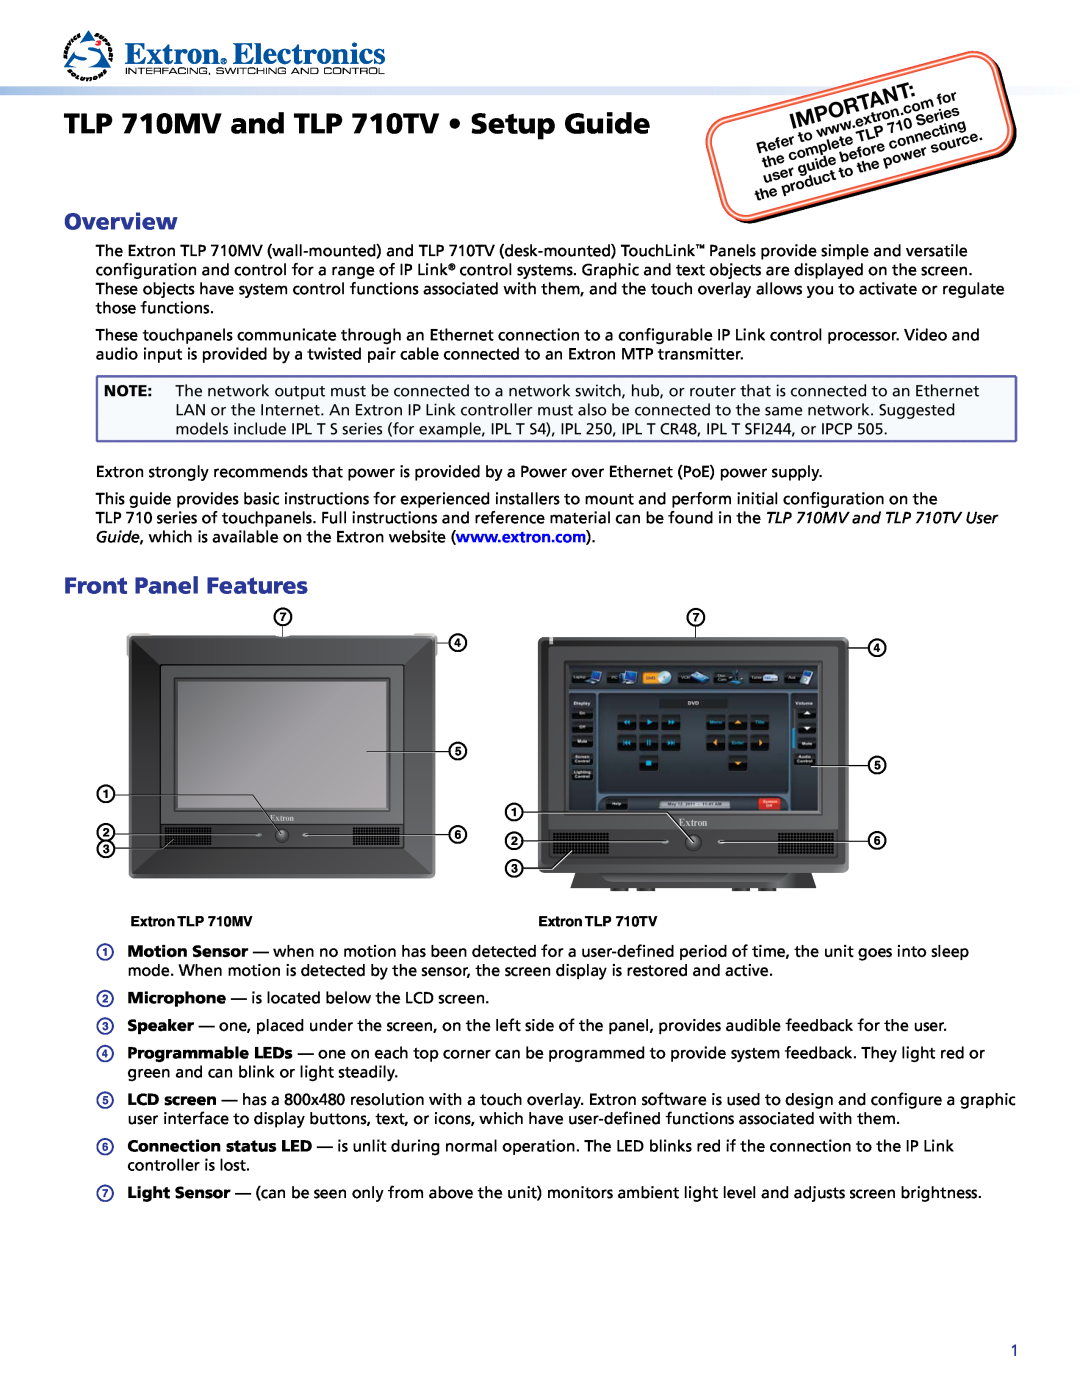 Extron electronic setup guide TLP 710MV and TLP 710TV Setup Guide, Overview, Front Panel Features 